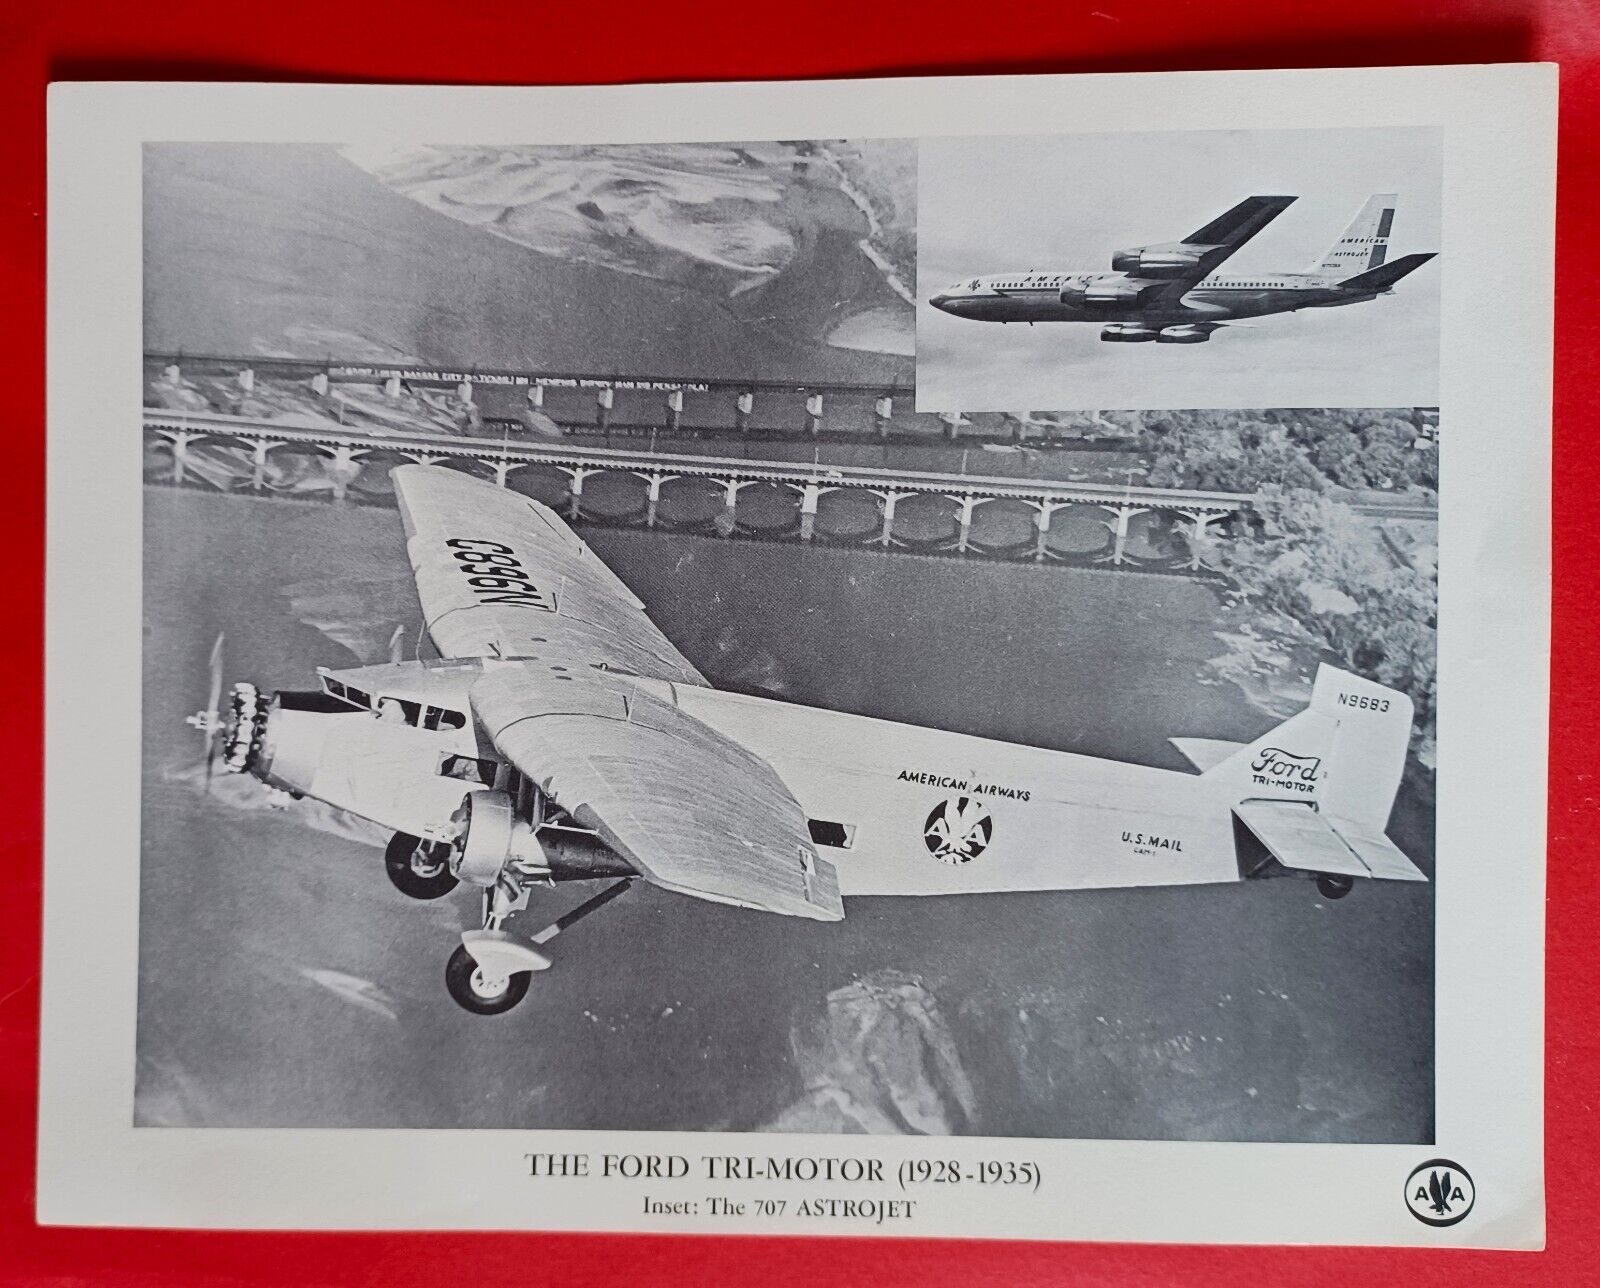 AMERICAN AIRWAYS Ford Trimotor AMERICAN AIRLINES Boeing 707 Photo Print